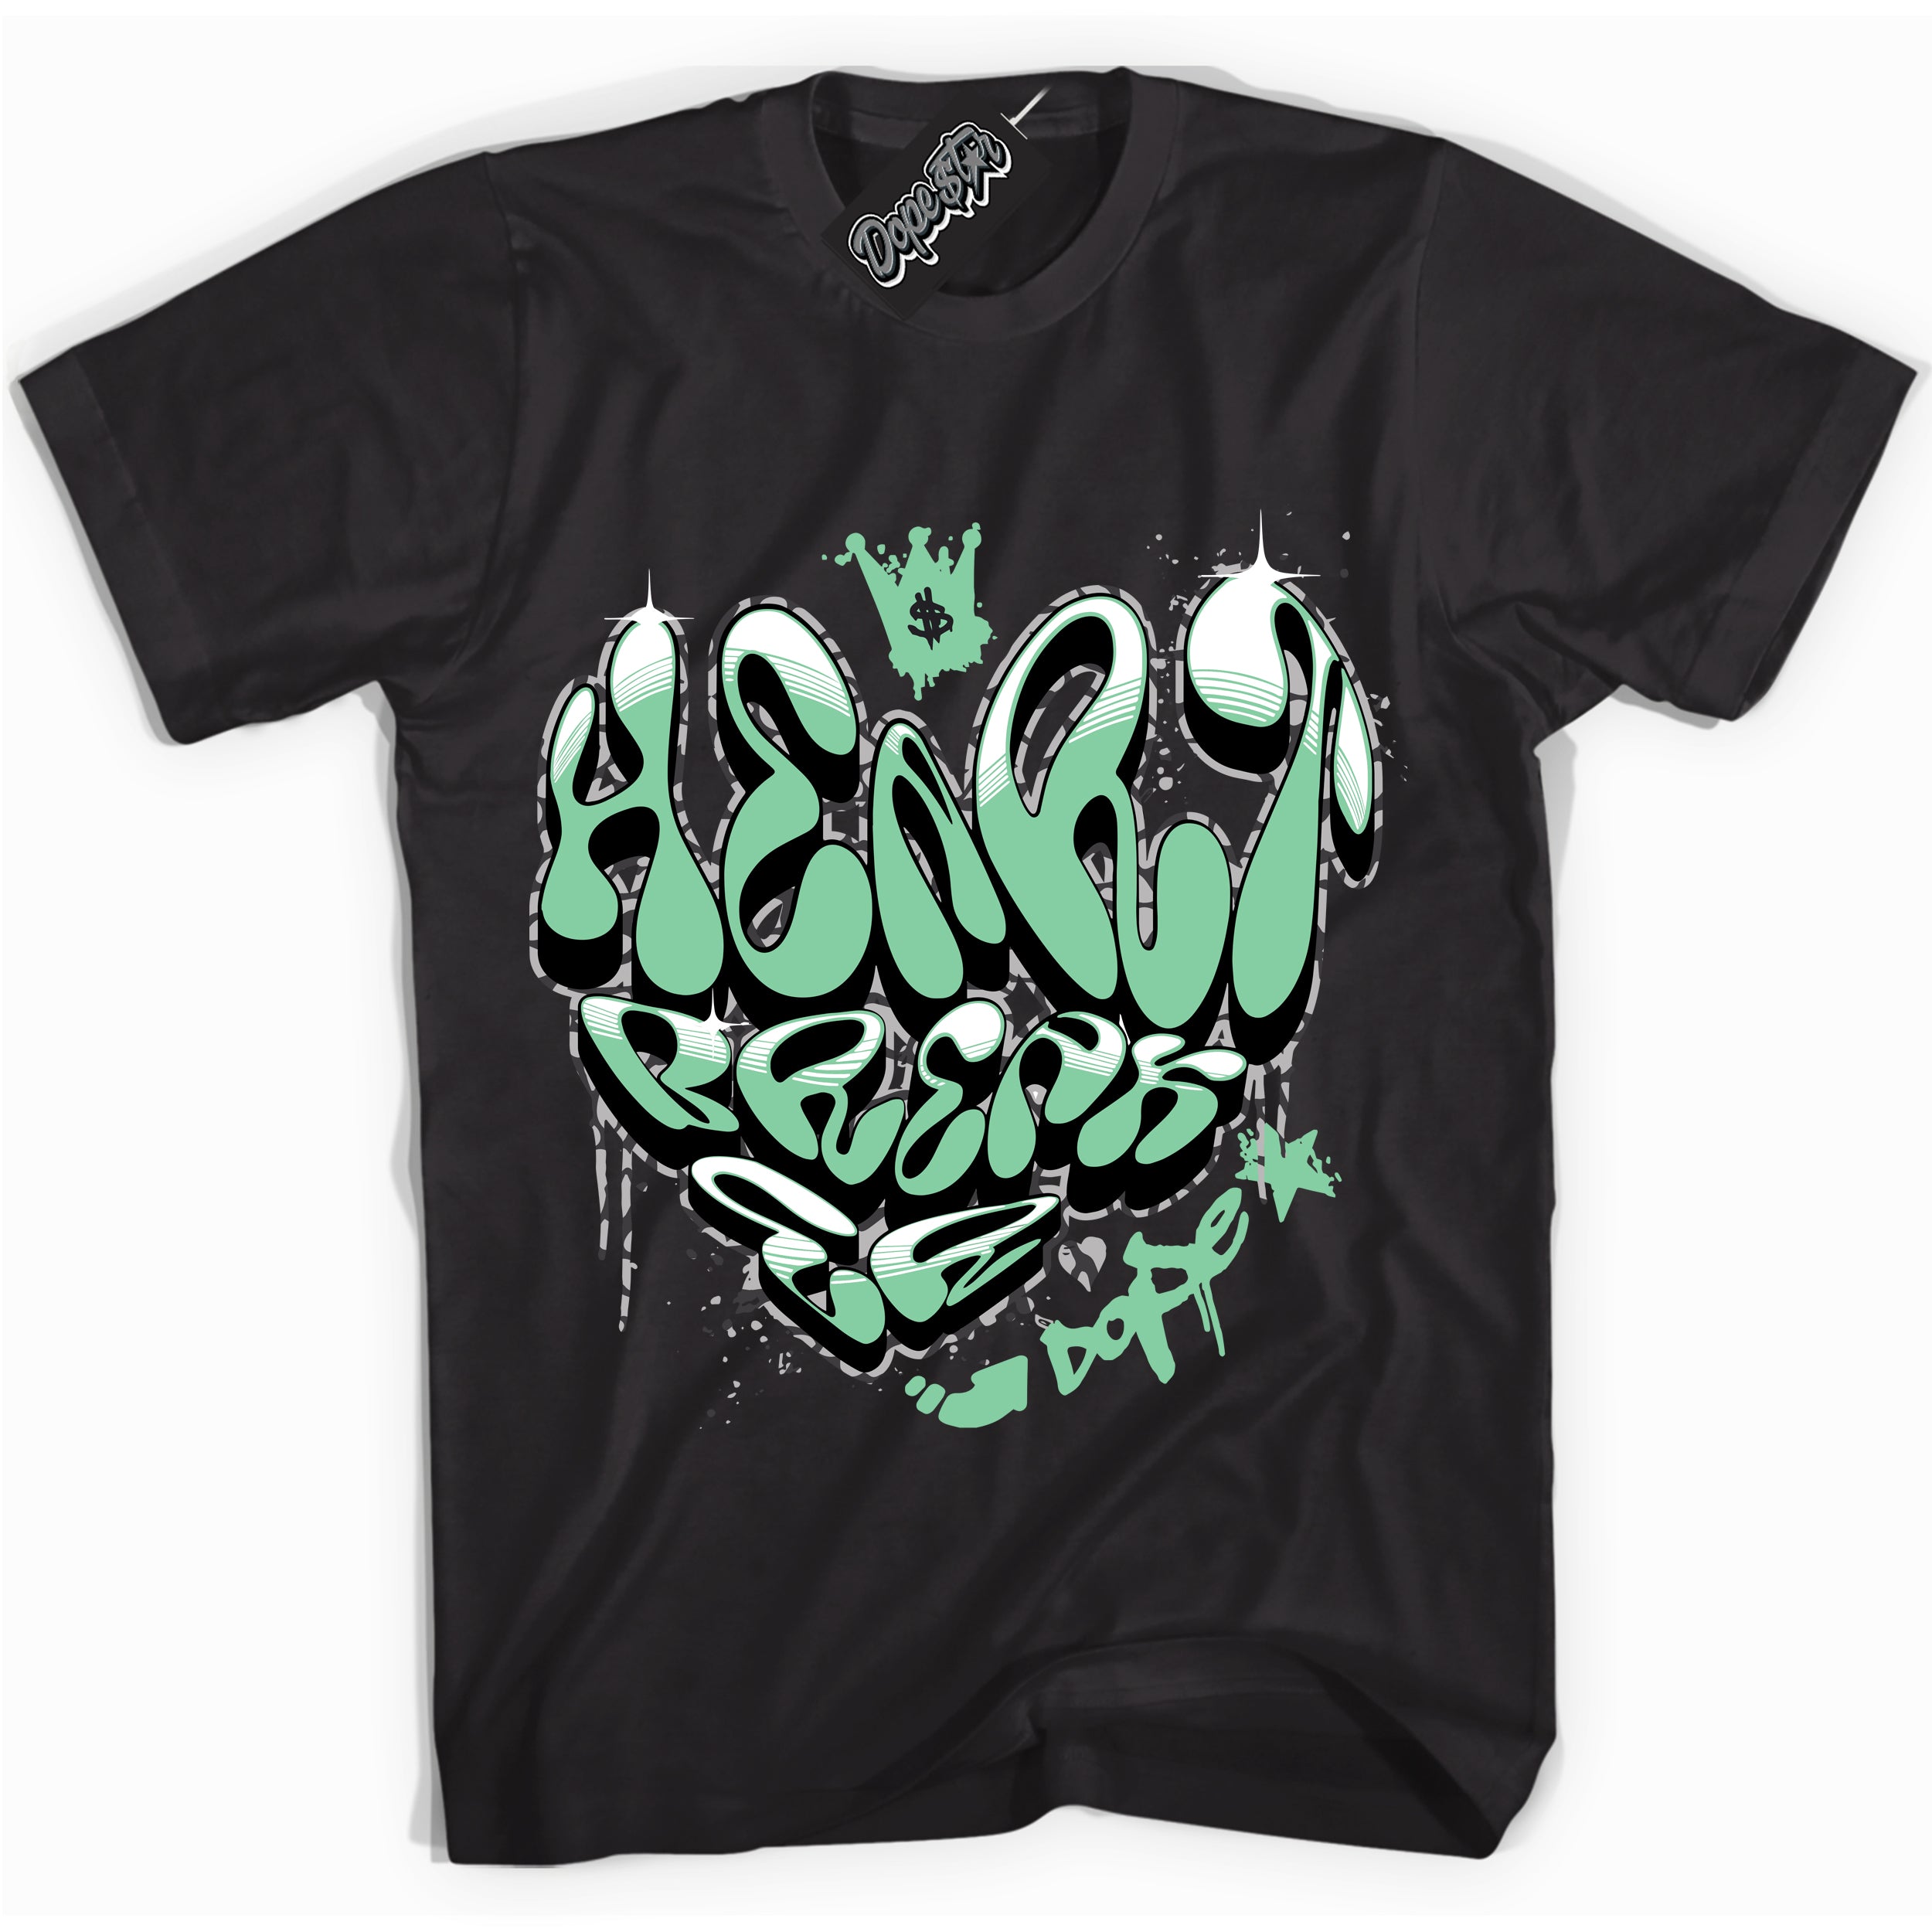 Cool Black graphic tee with “ Heartbreaker Graffiti ” design, that perfectly matches Green Glow 3s sneakers 